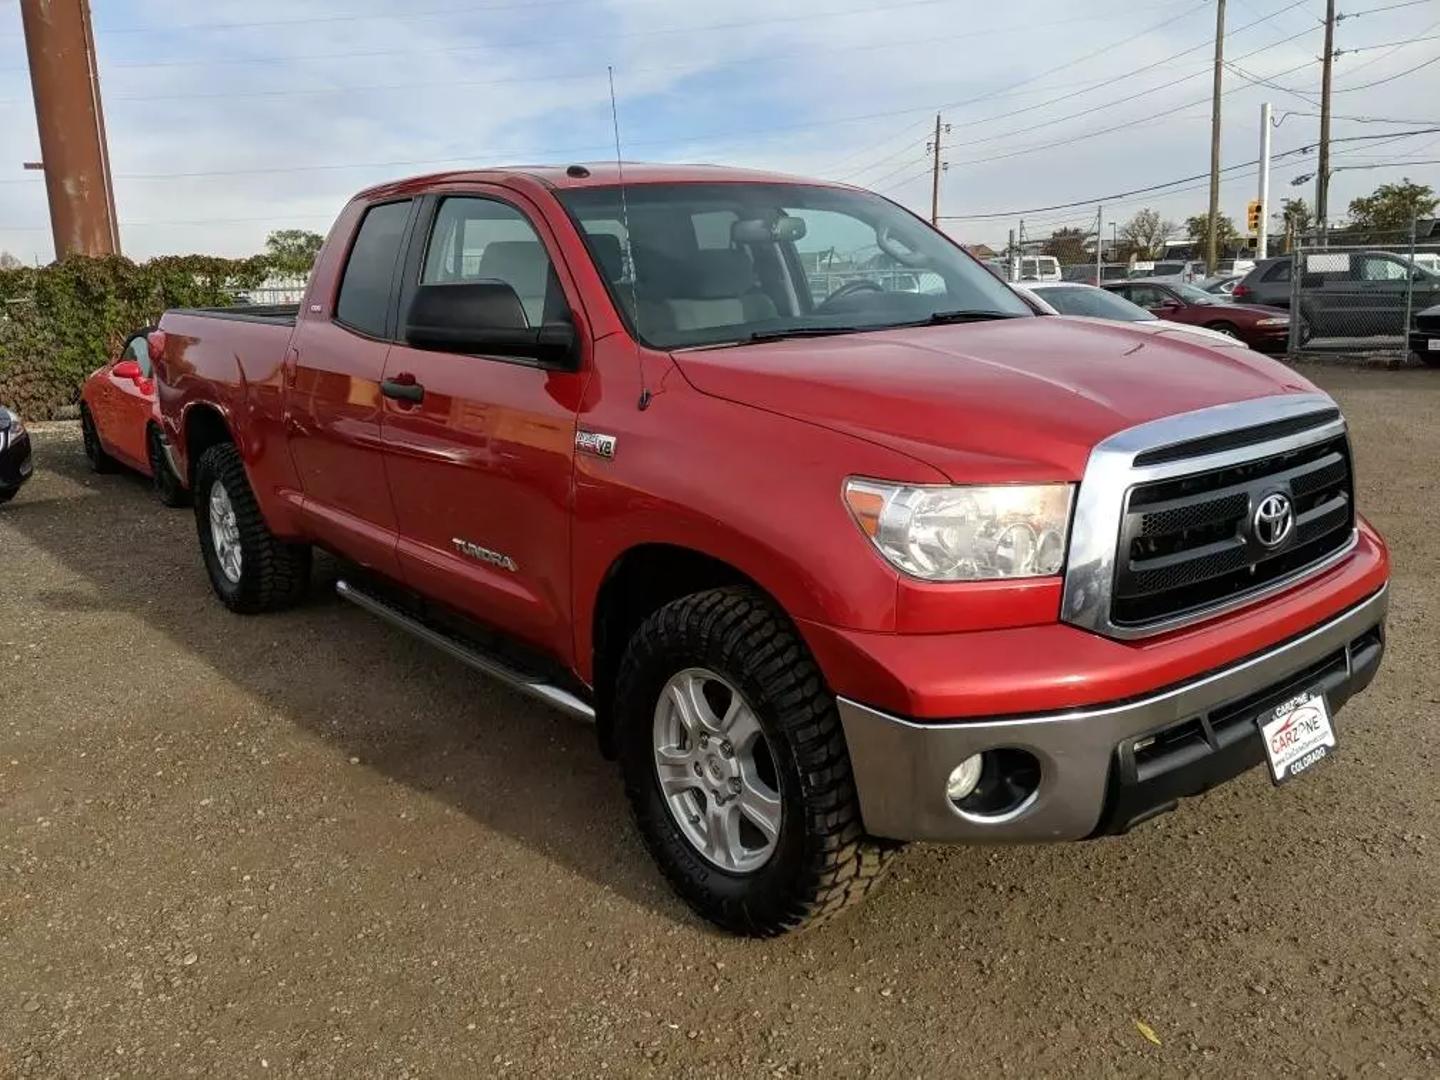 USED TOYOTA TUNDRA DOUBLE CAB 2013 for sale in Denver, CO | Car Zone